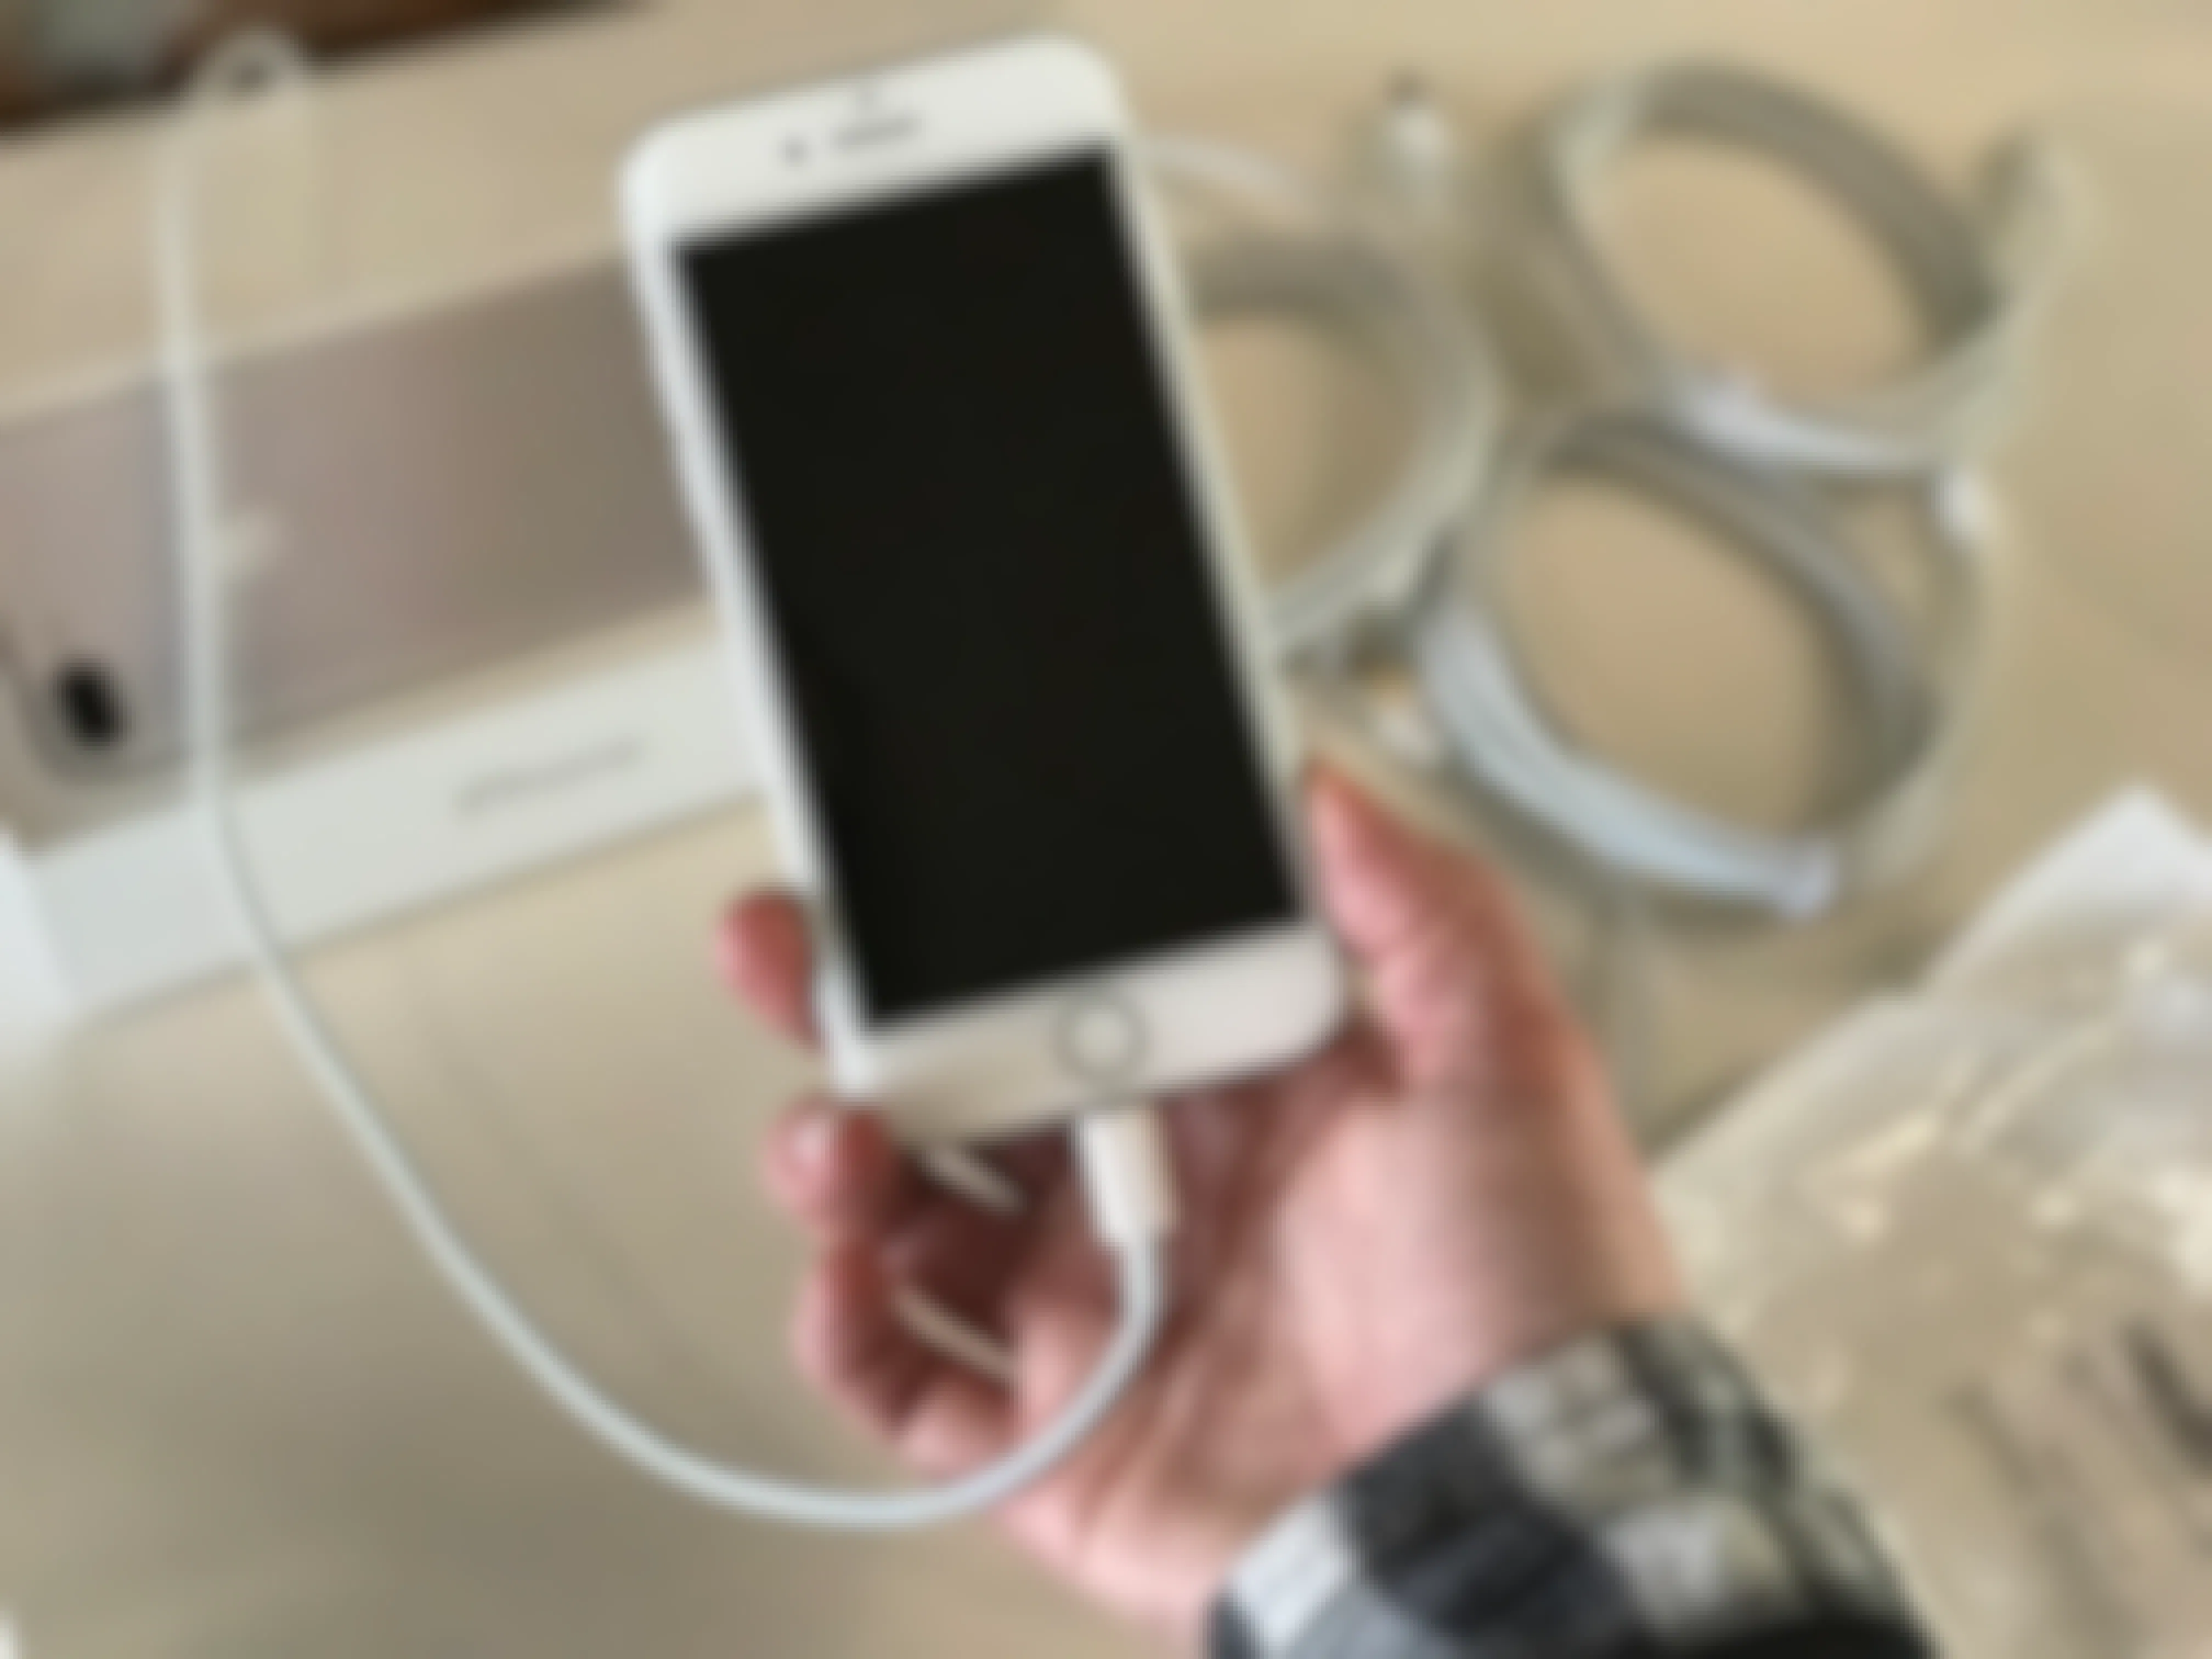 A person holding an iphone wthat's charging.